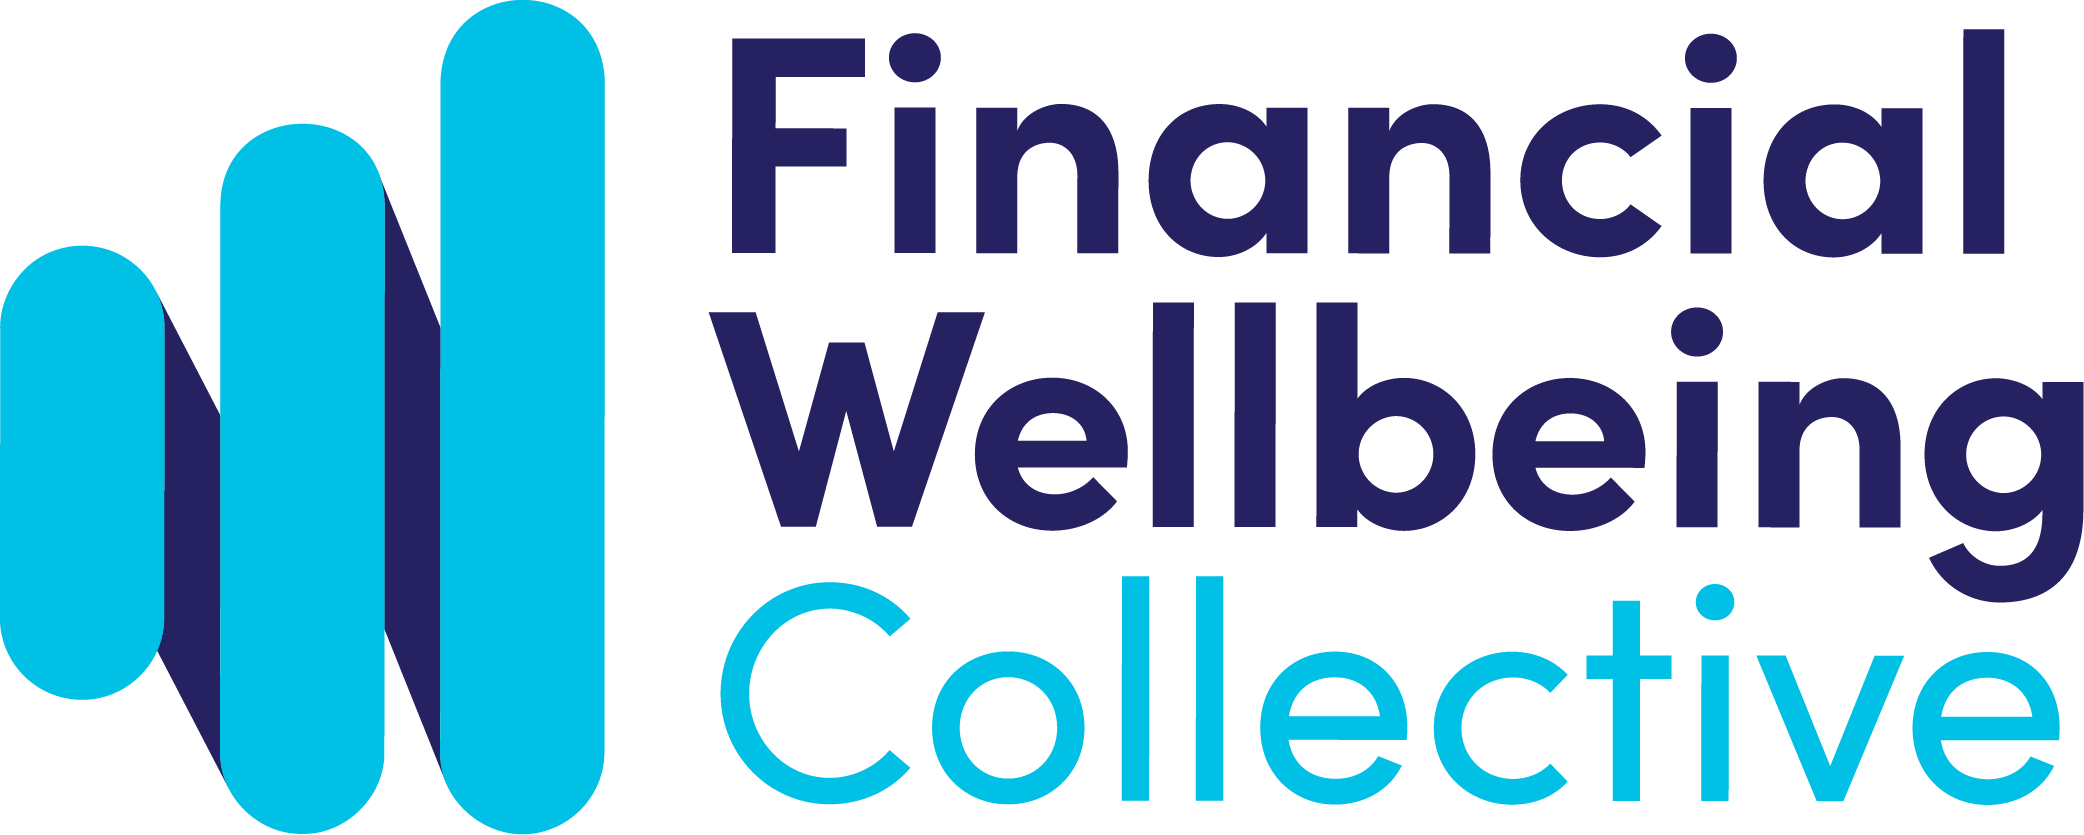 Financial Wellbeing Collective